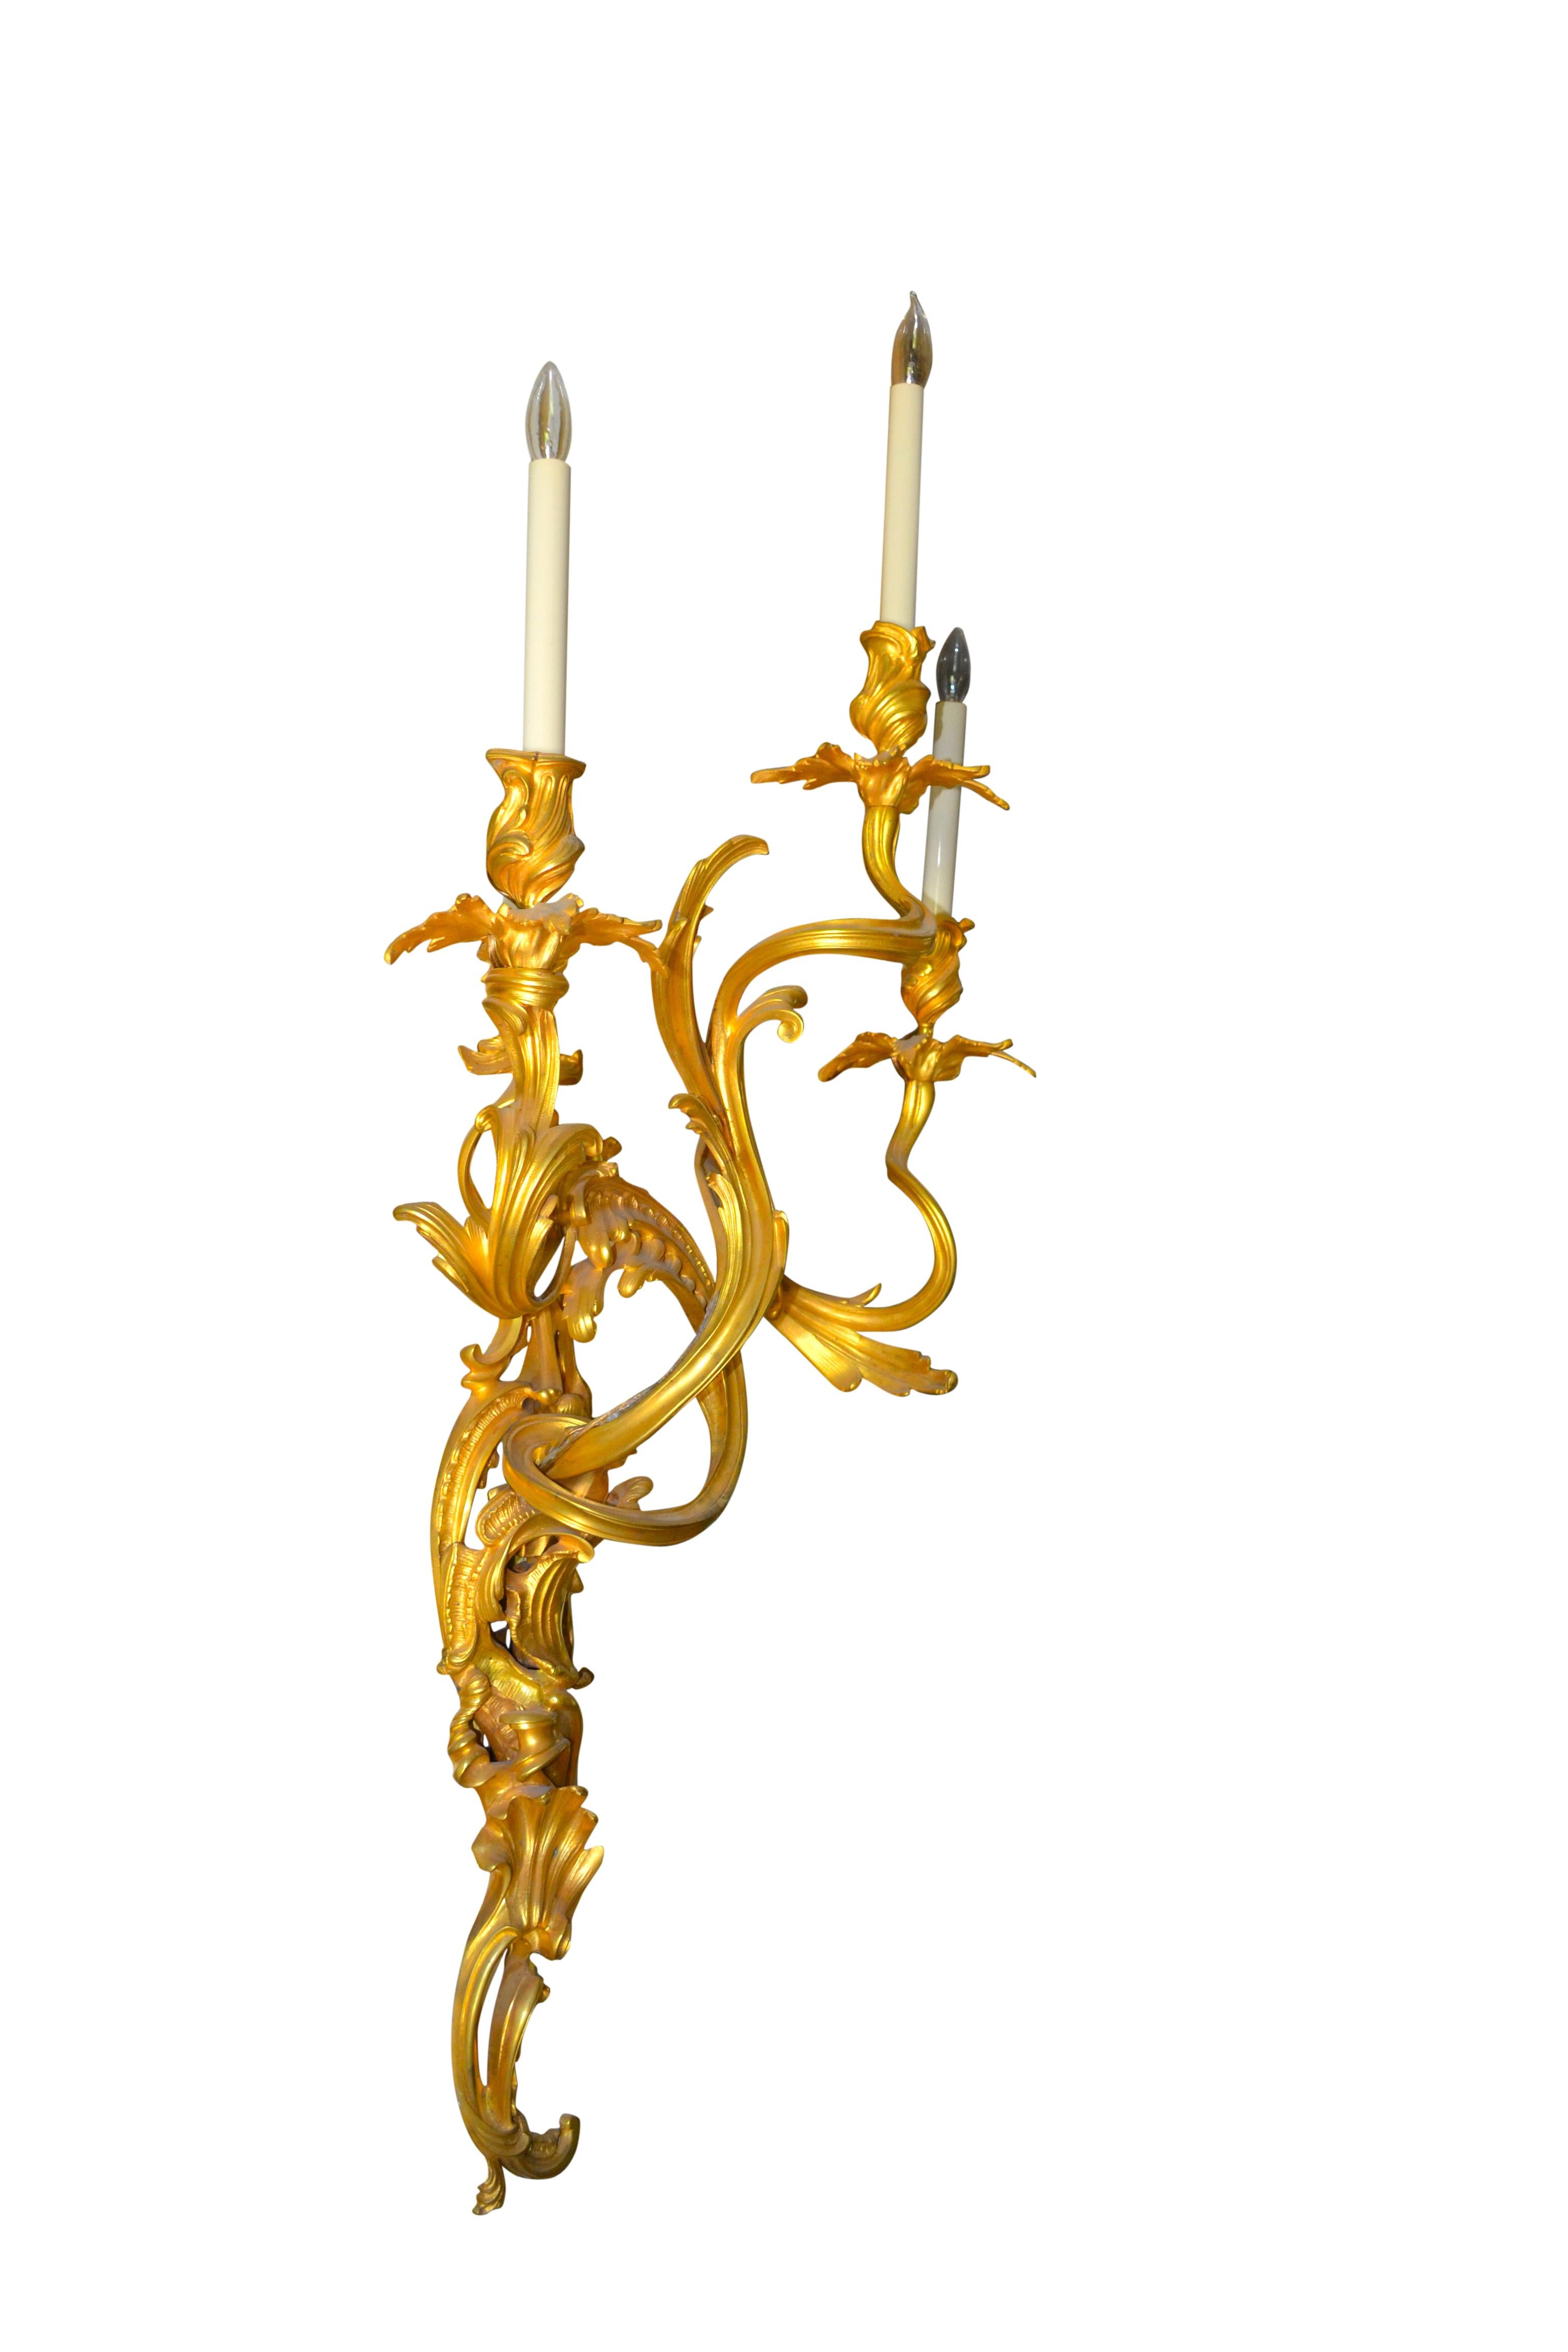 Pair of Large 19 Century French Gilt Bronze Louis XV Style Sconces In Good Condition For Sale In Vancouver, British Columbia